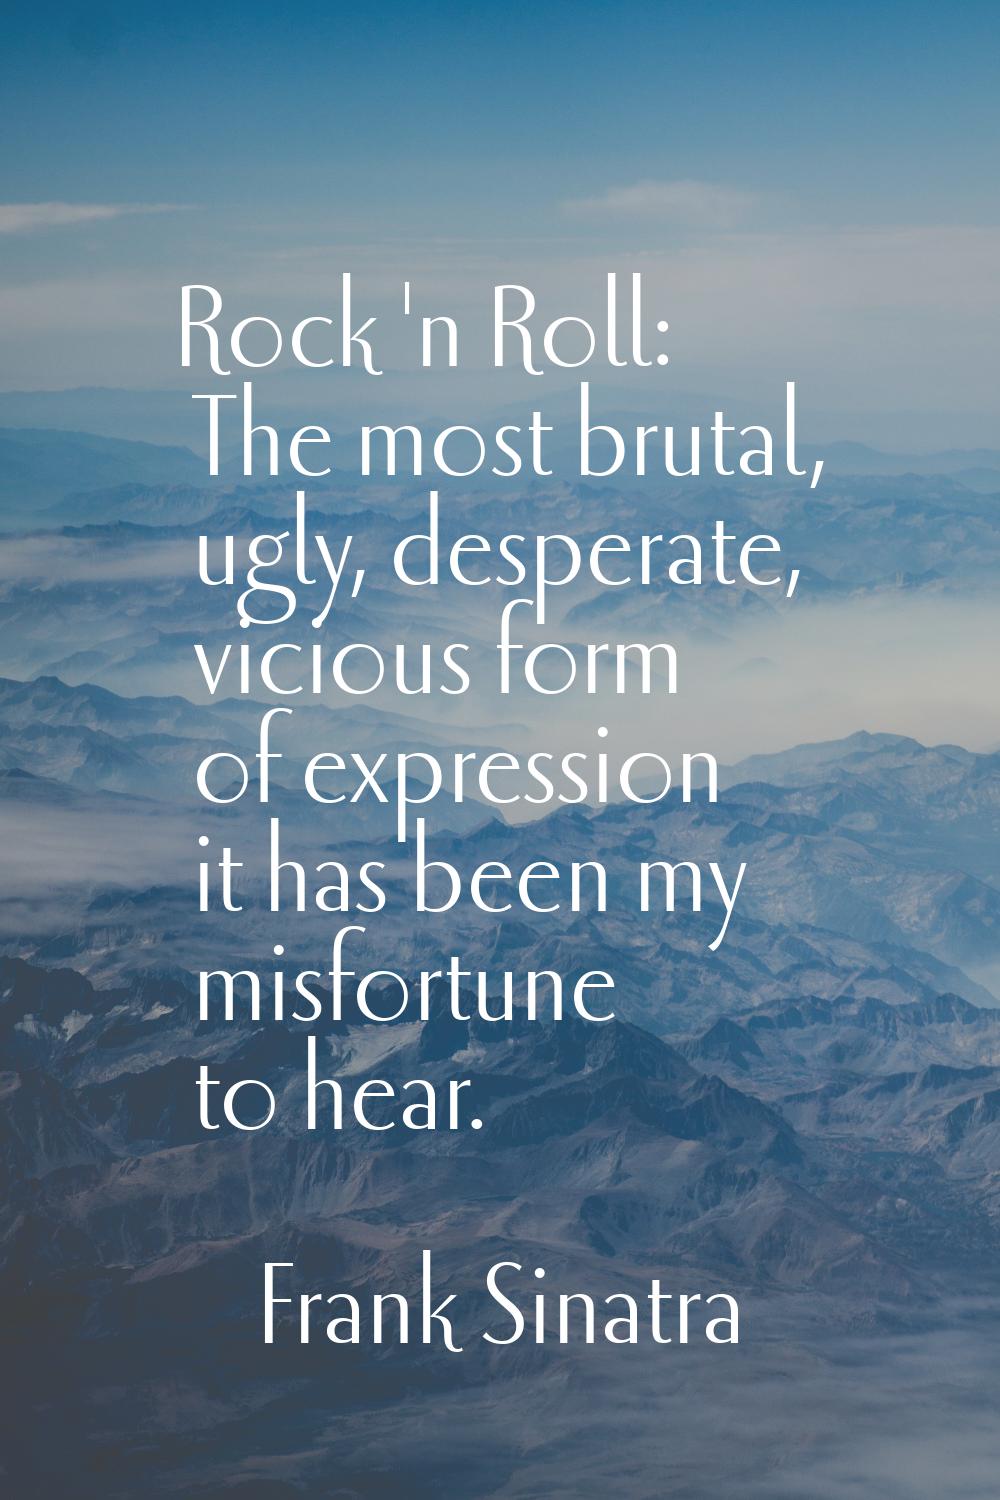 Rock 'n Roll: The most brutal, ugly, desperate, vicious form of expression it has been my misfortun